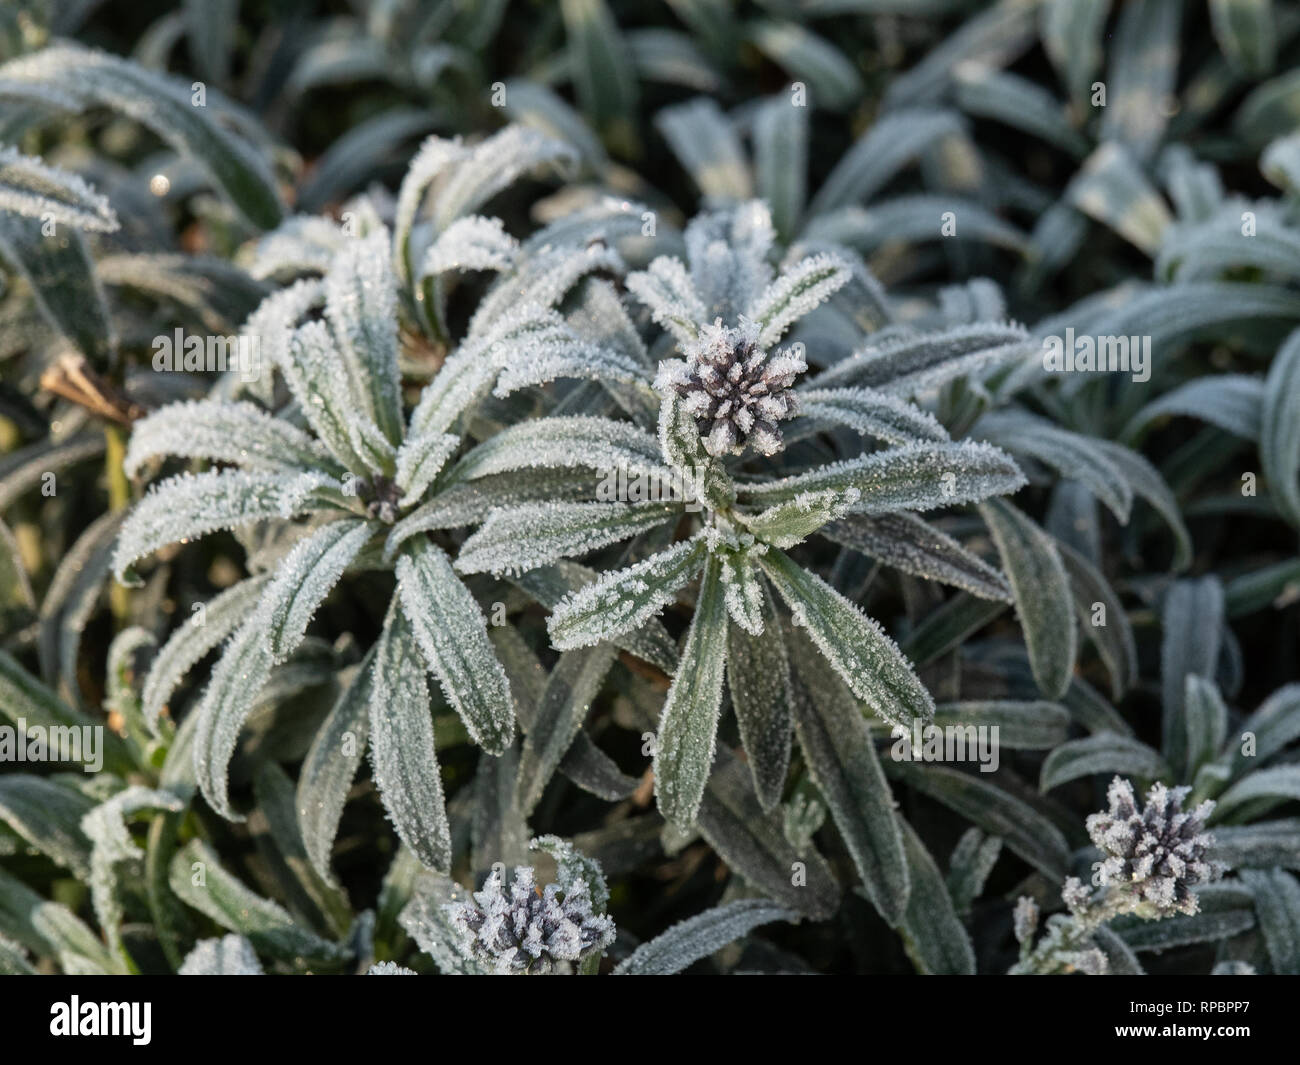 A delicate coating of hoar frost on the mid grey foliage of Erysimum Bowles Hydrid Stock Photo